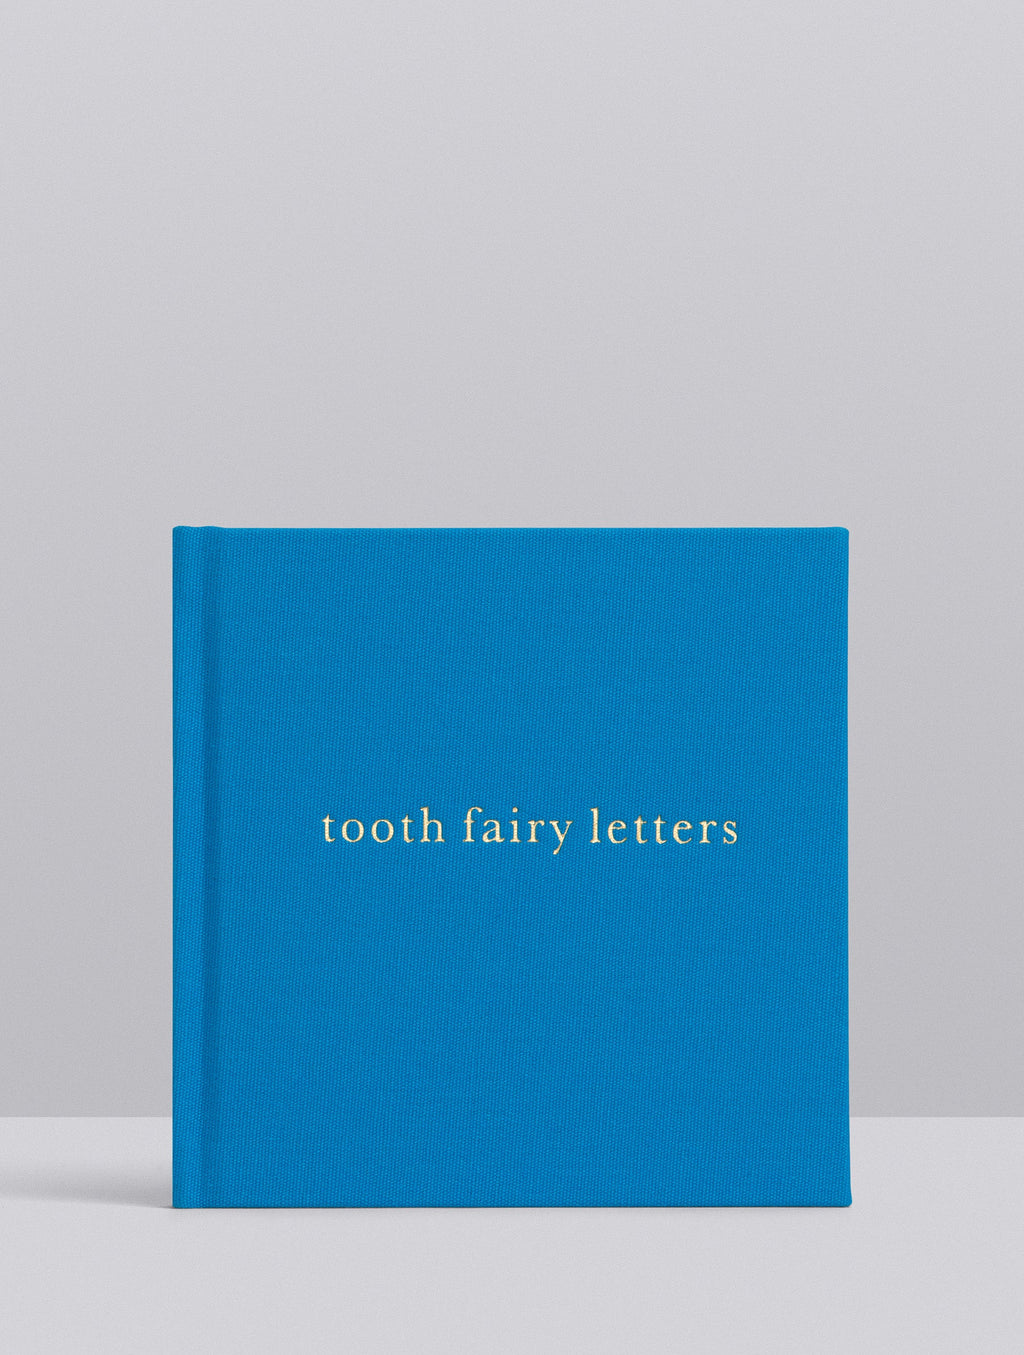 tooth fairy letters blue 1